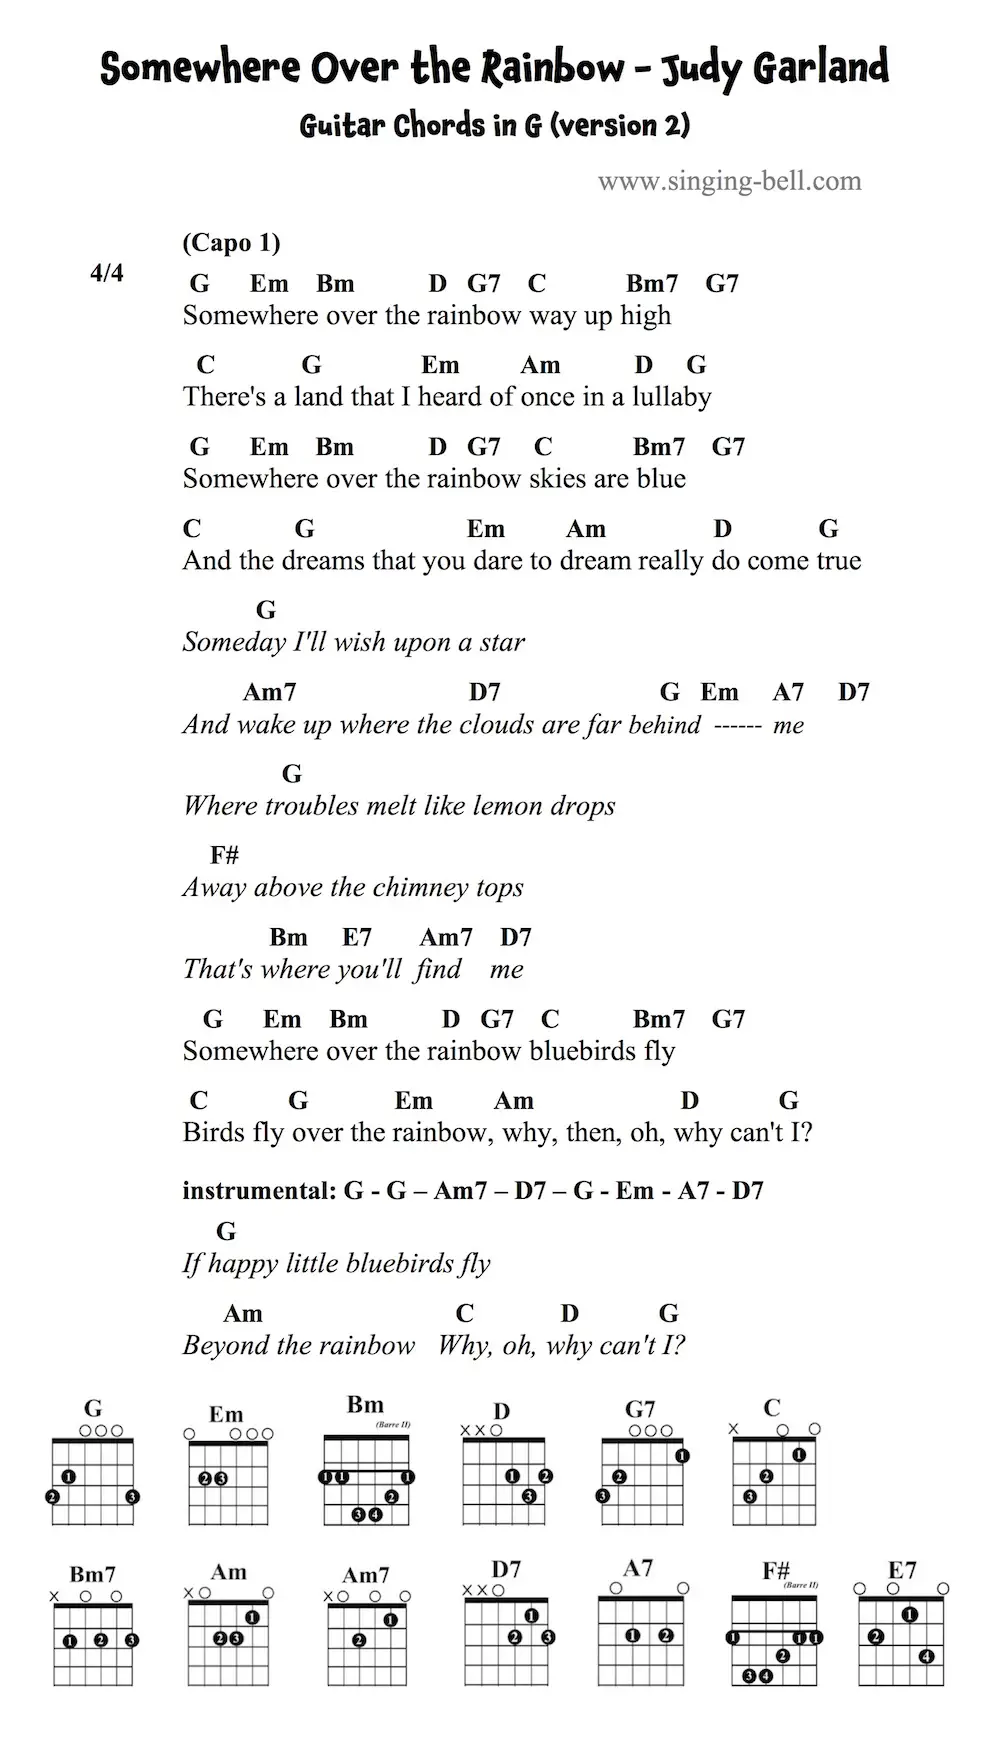 Somewhere Over the Rainbow Judy Garland guitar chords and tabs in the key of G.